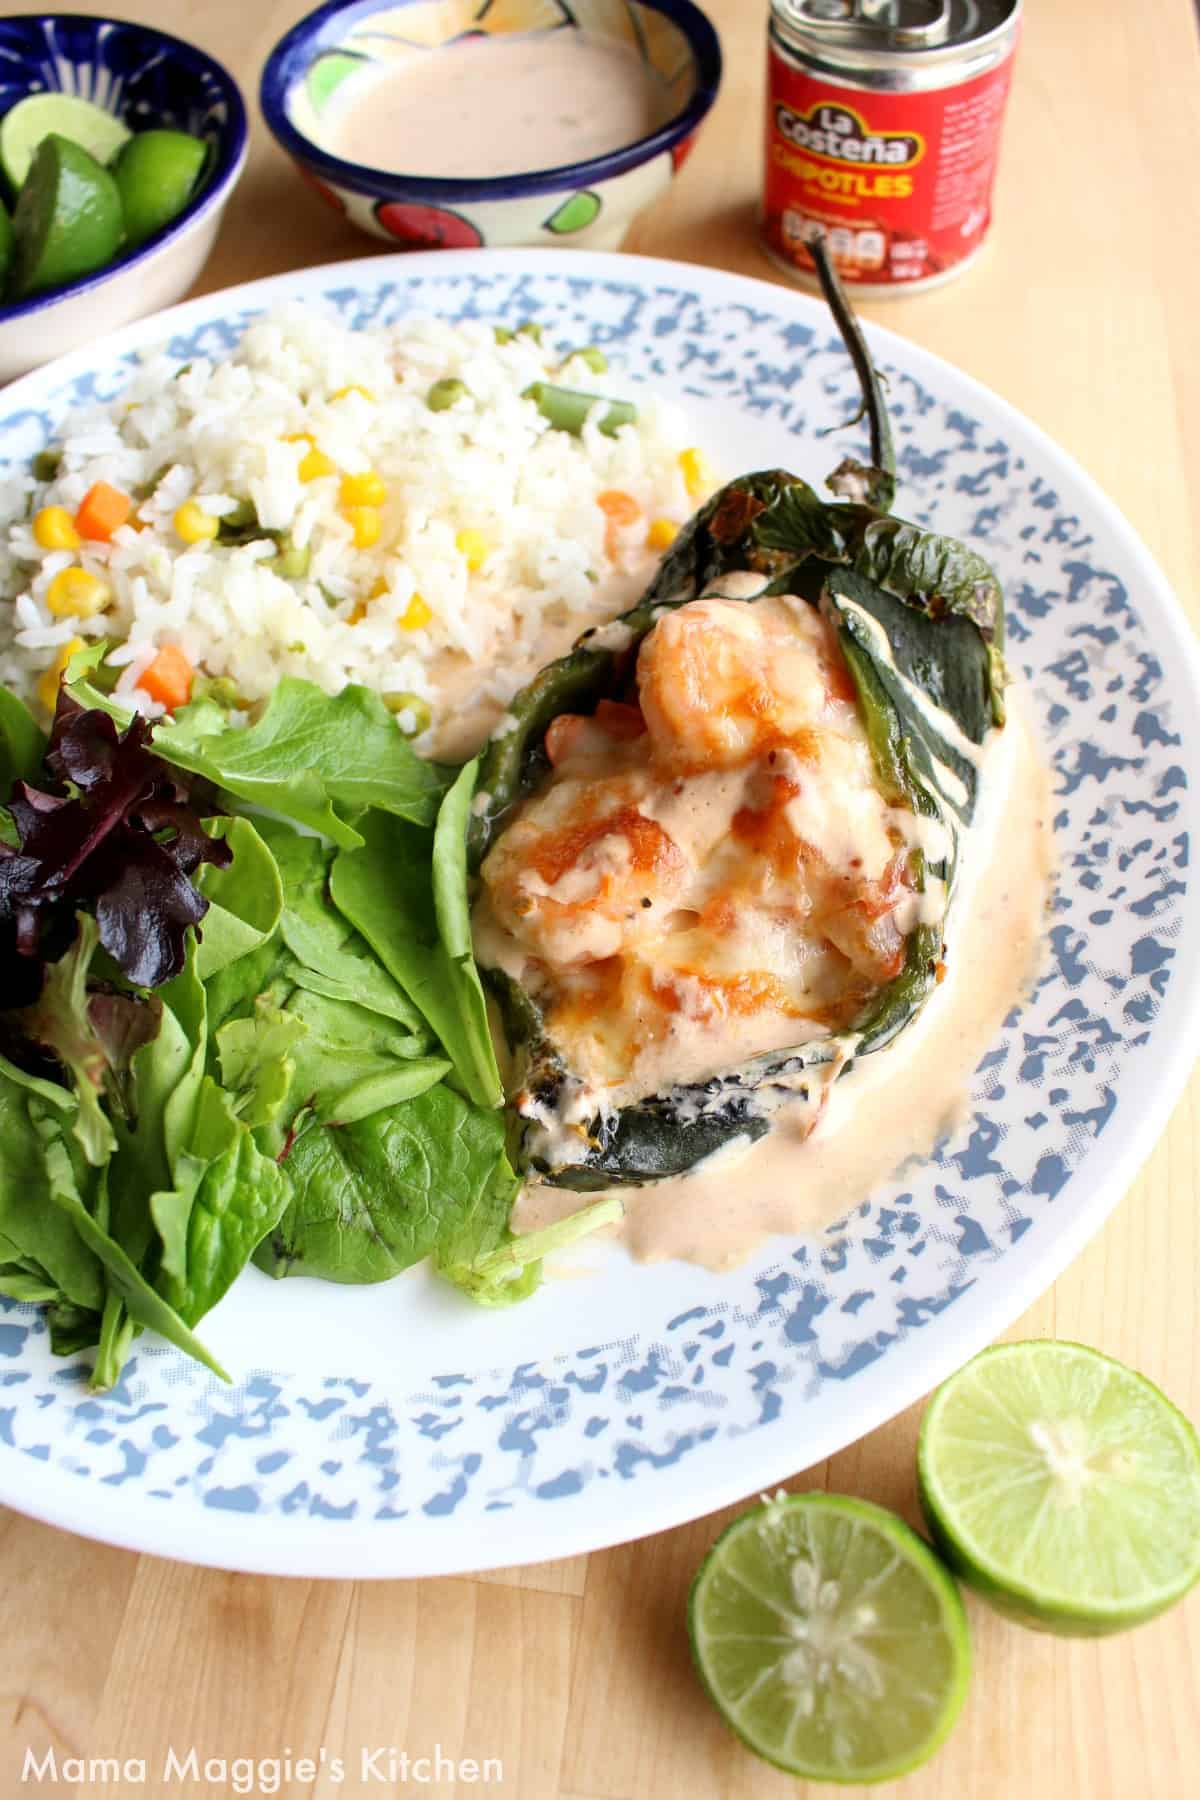 A shrimp chile relleno served on a plate next to a salad and rice.